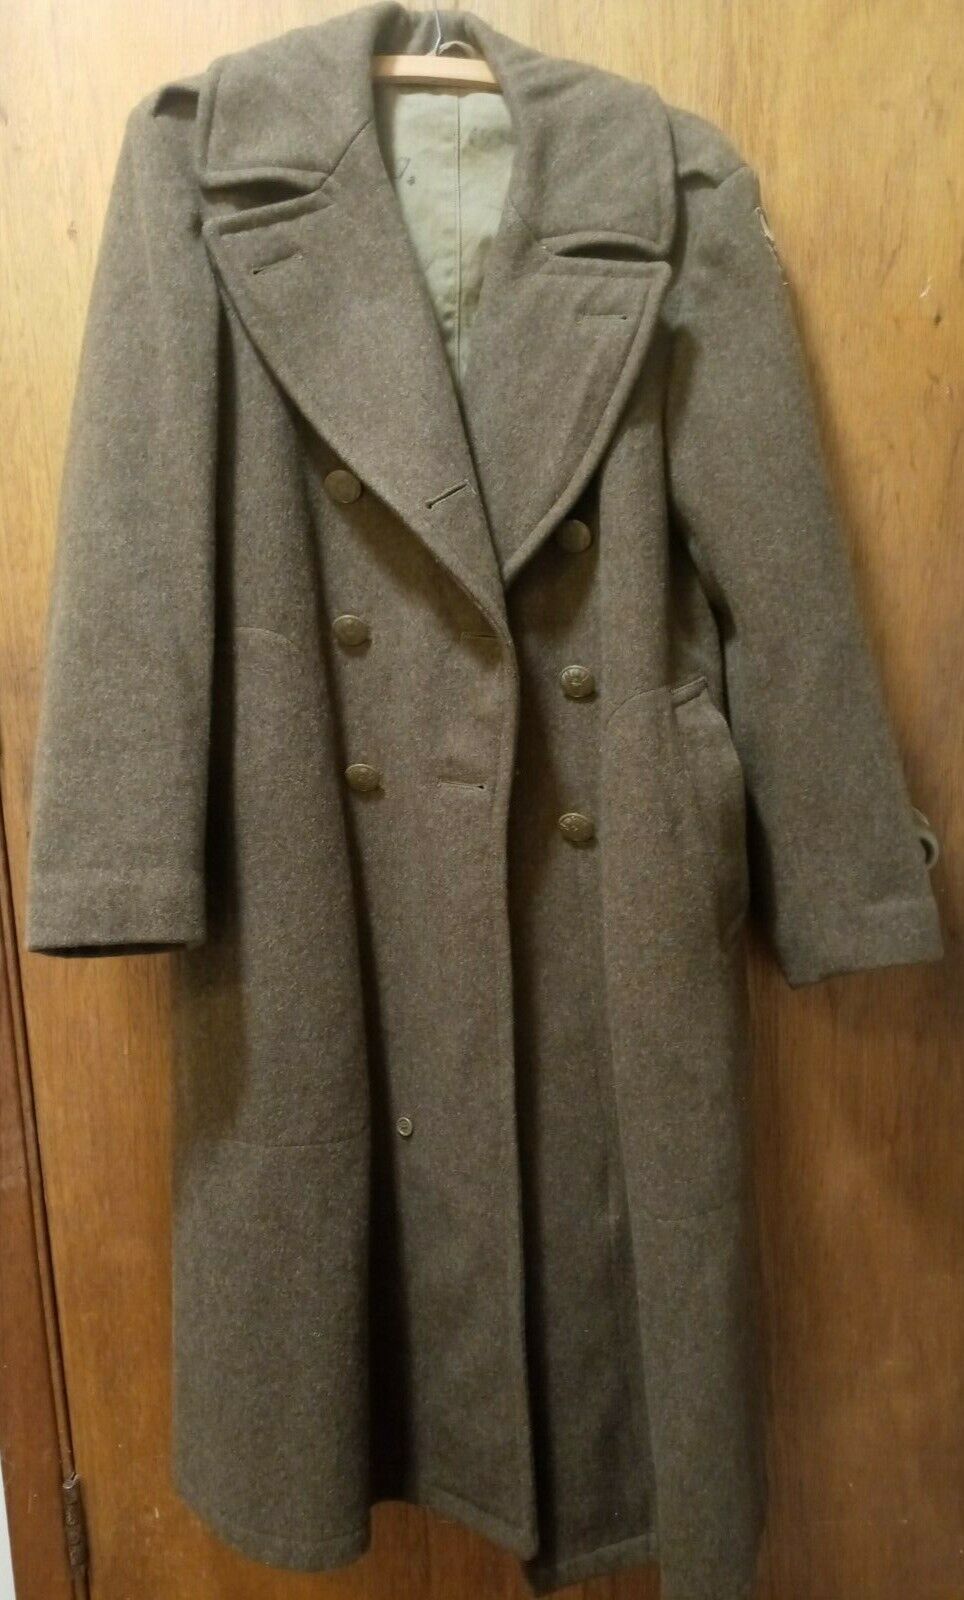 Vintage 1942 US Army 75th Infantry Division Wool Trench Coat WW2 WWII 36R